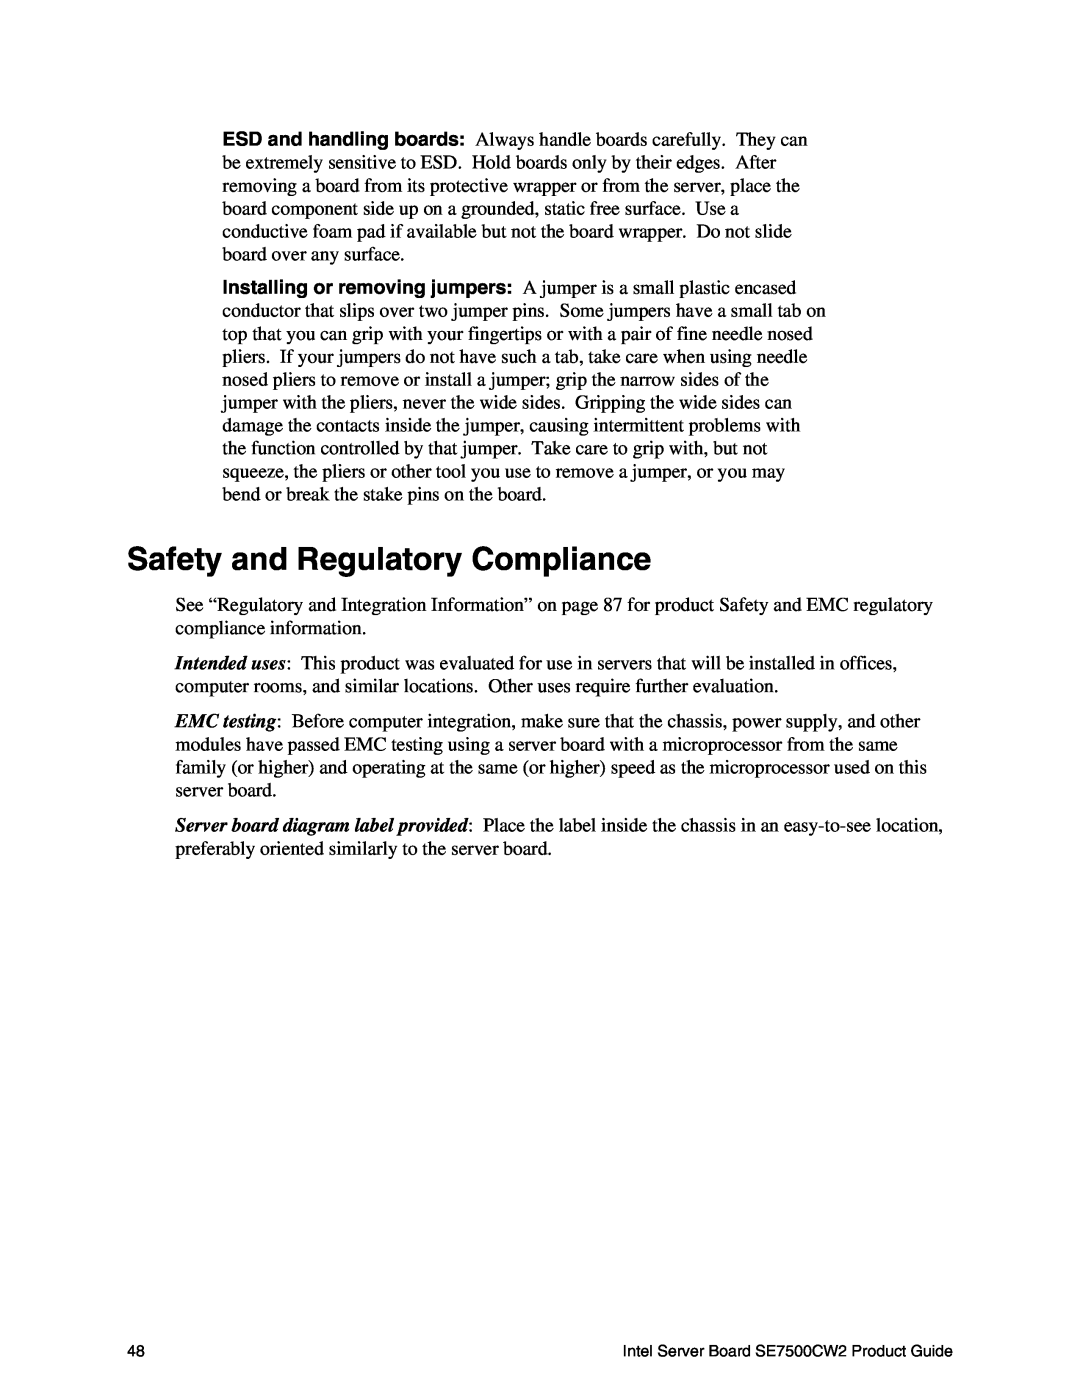 Intel manual Safety and Regulatory Compliance, Intel Server Board SE7500CW2 Product Guide 